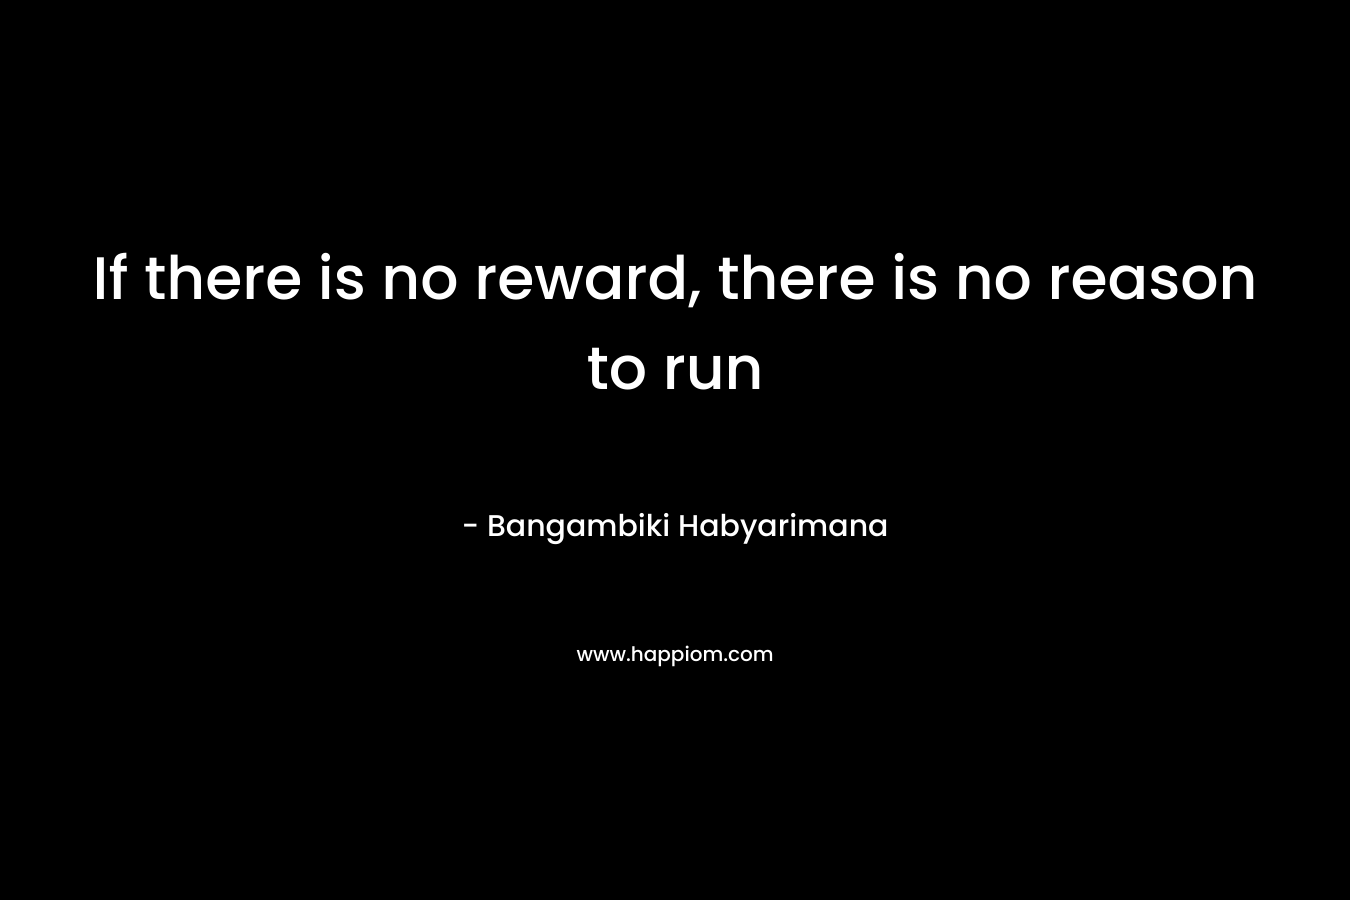 If there is no reward, there is no reason to run